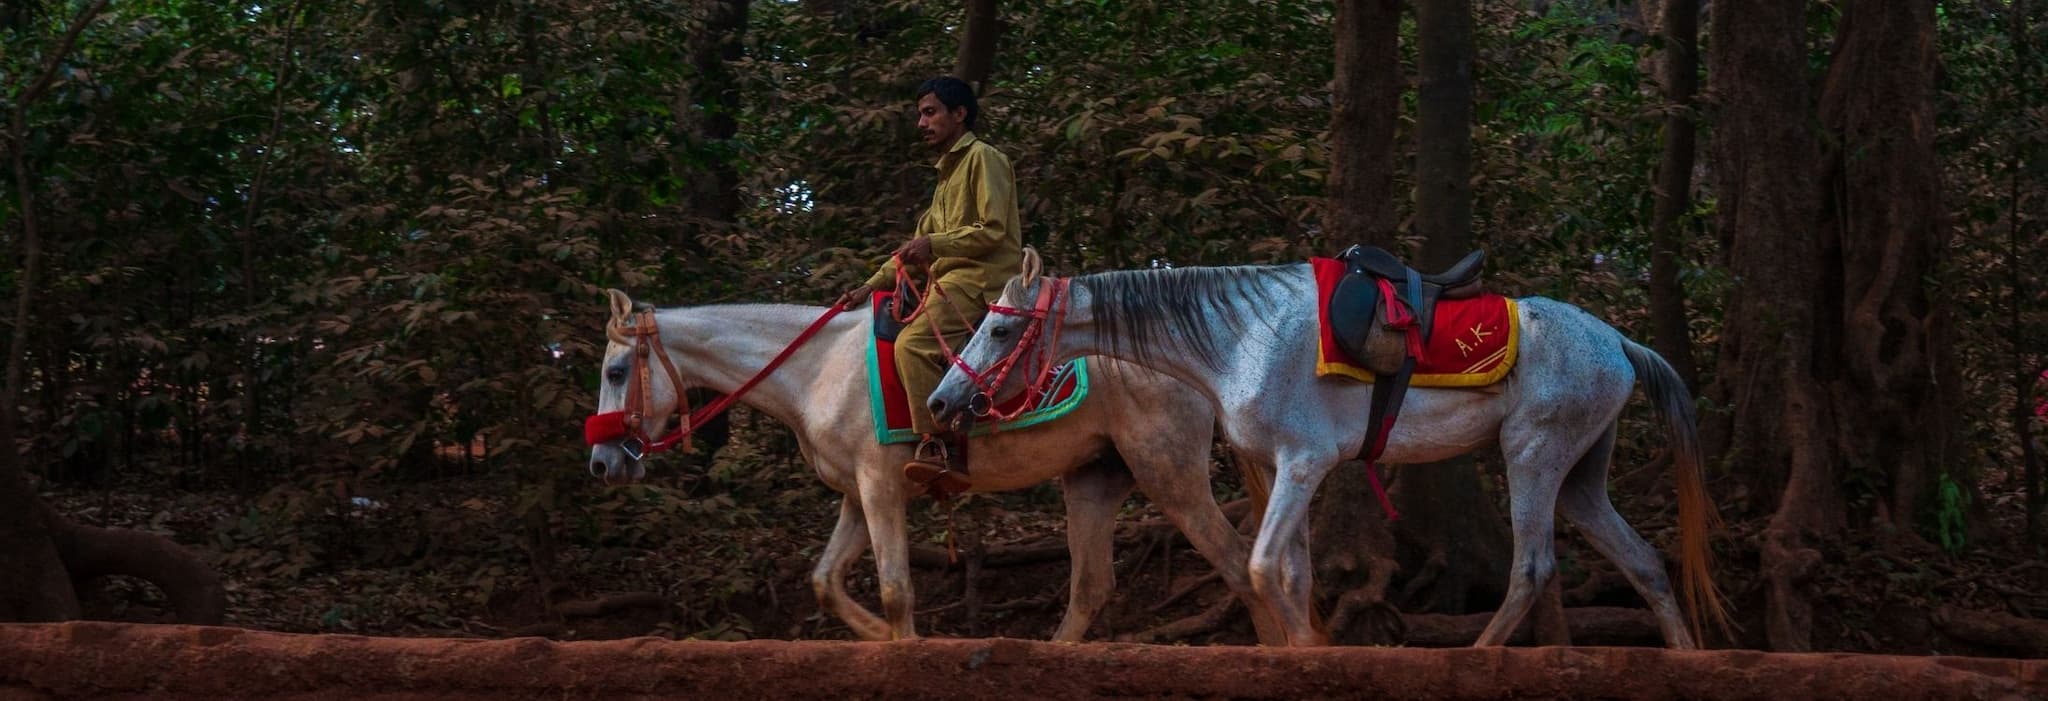 The Horse Keepers Of Matheran